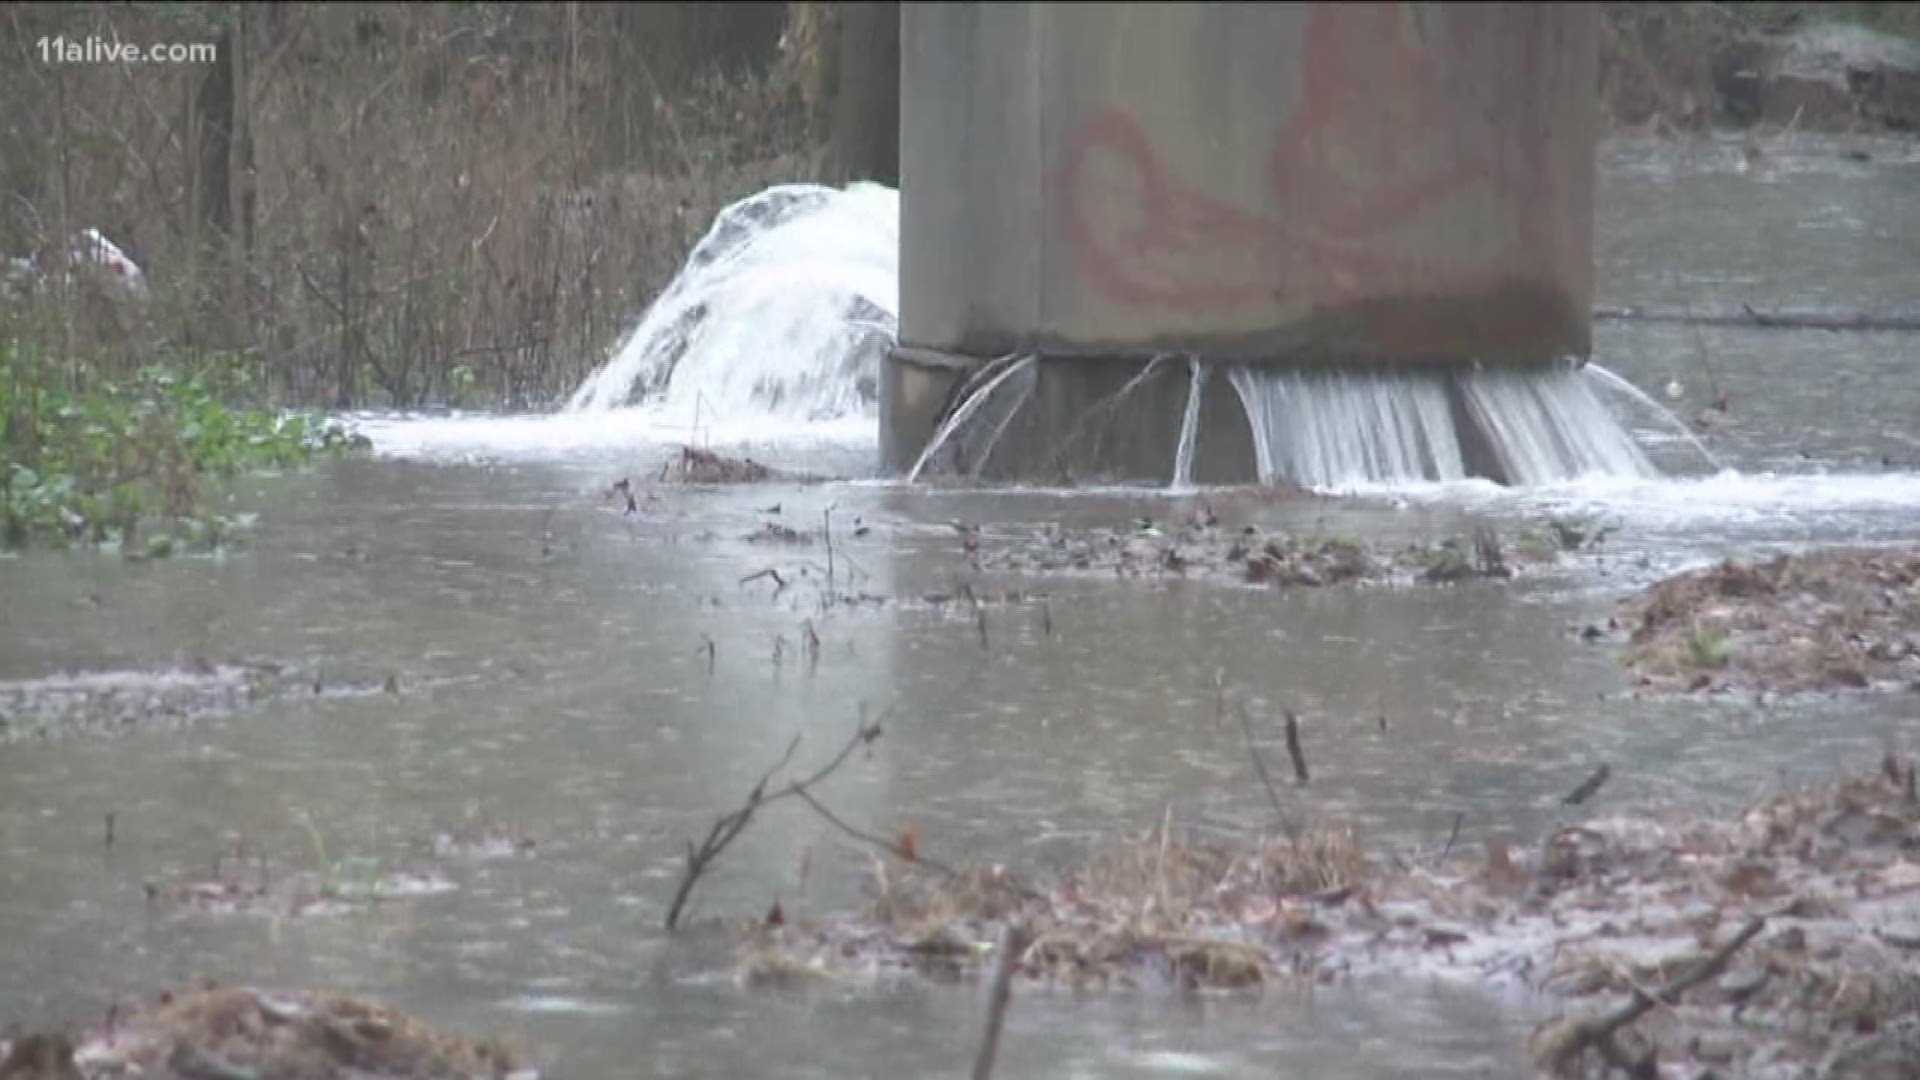 sewage-spill-stopped-in-cobb-county-officials-say-11alive